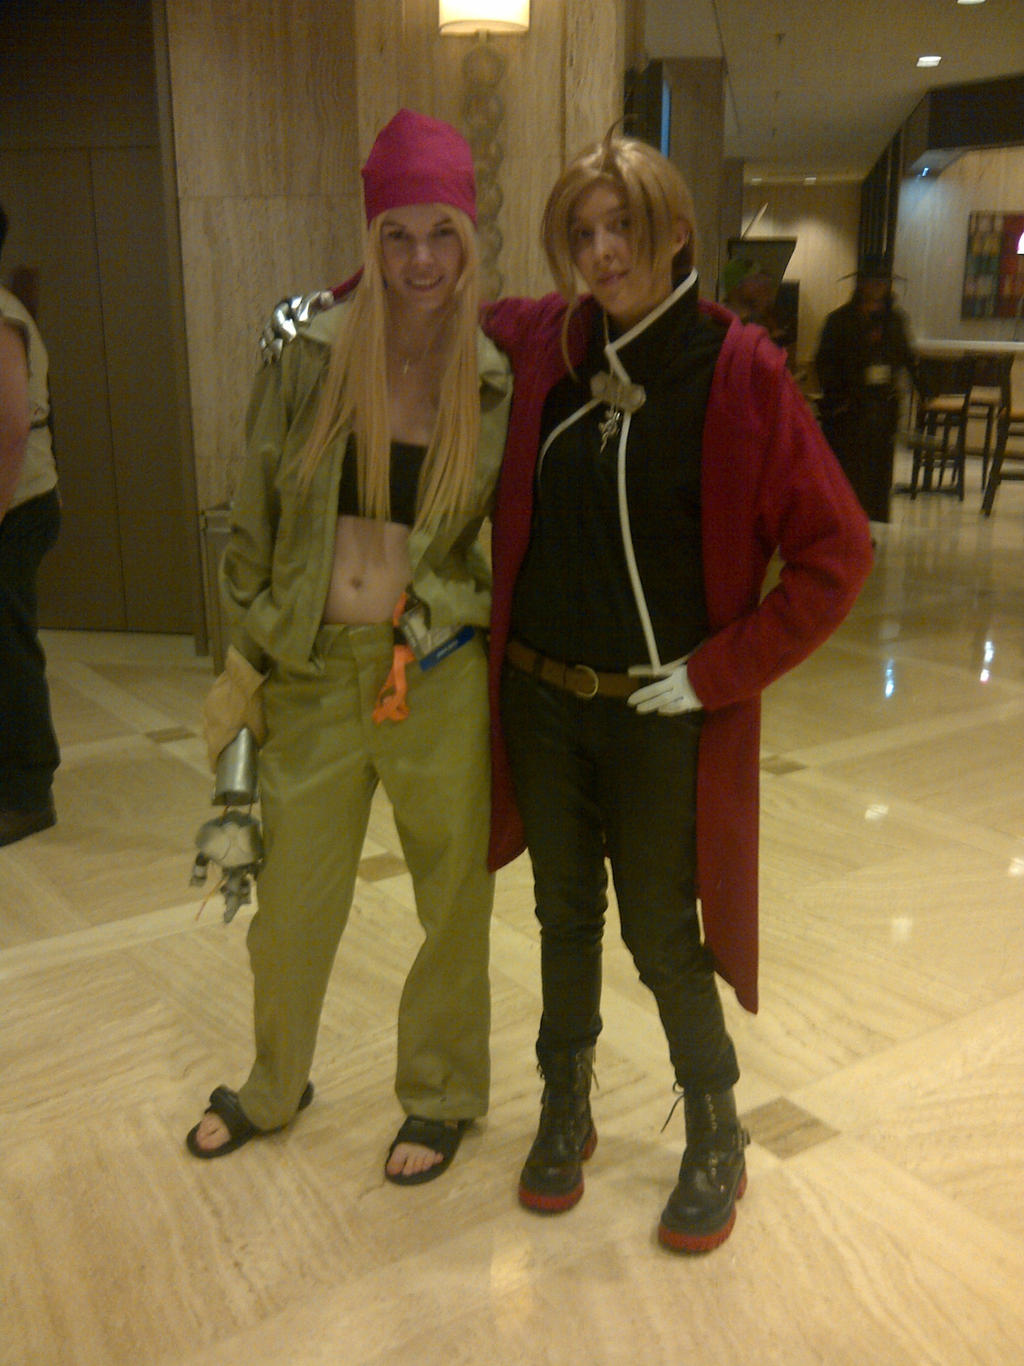 Edward Elric and Winry Rockbell